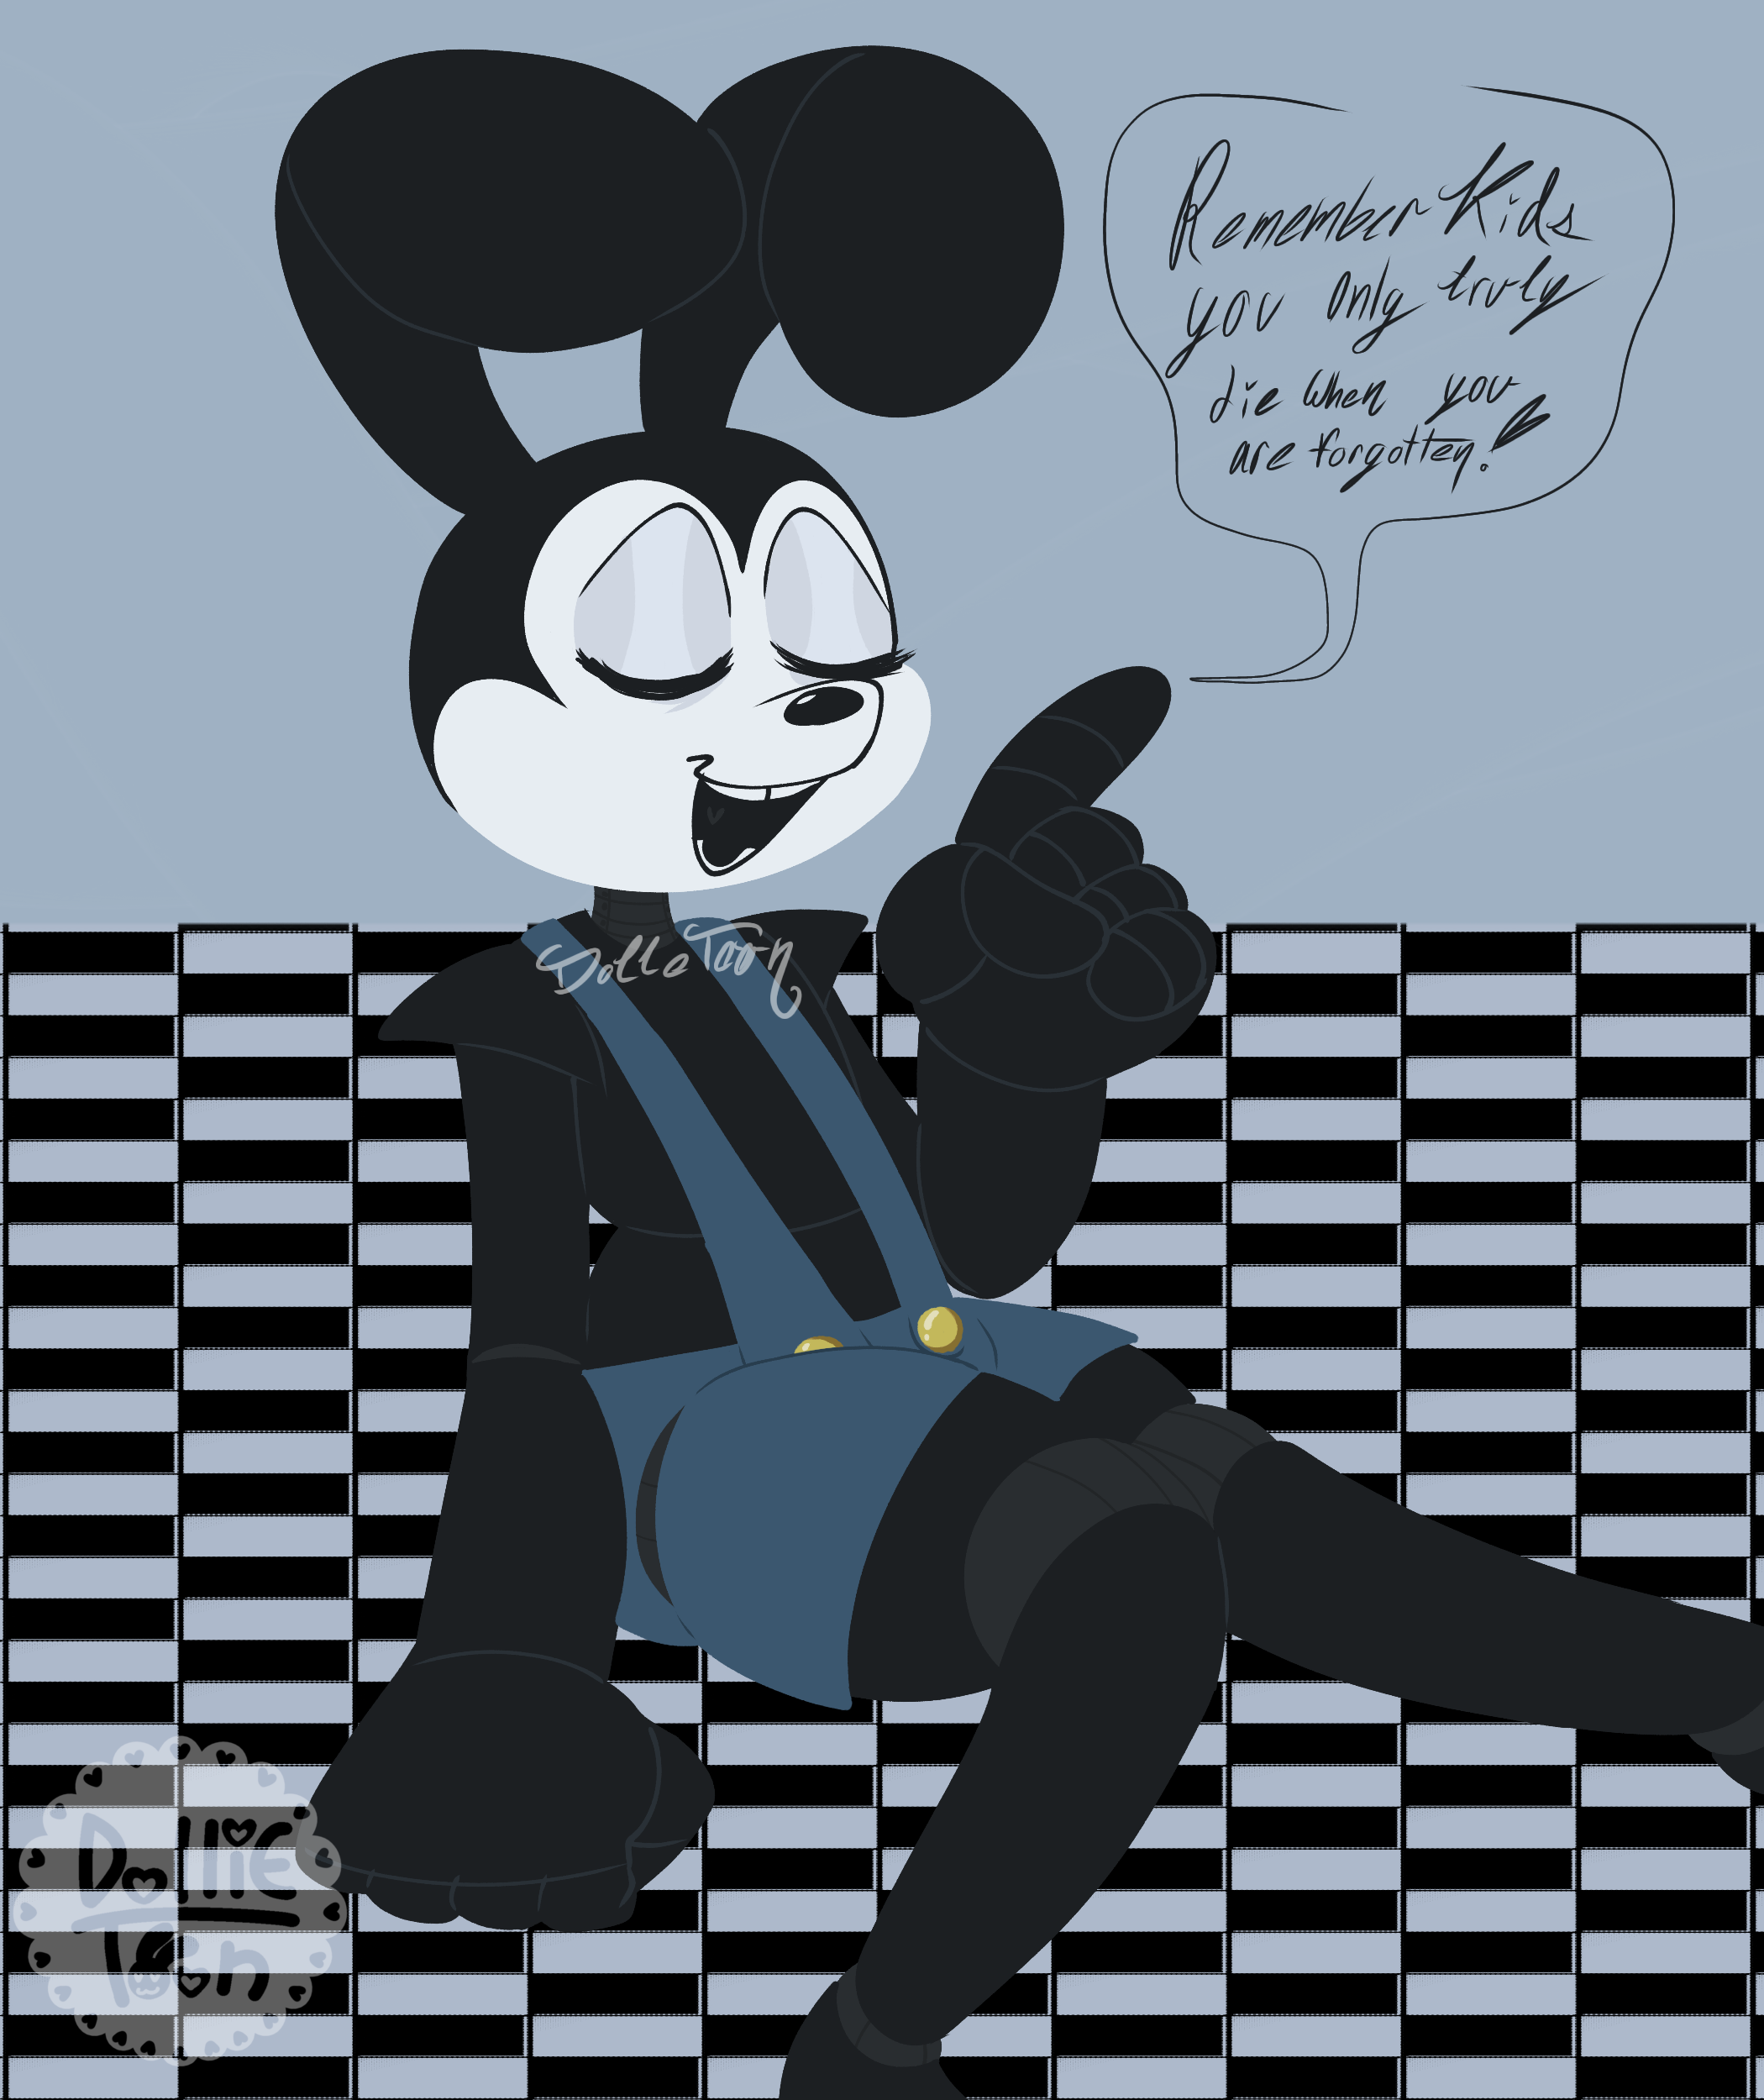 Welcome one and all to Flumpty Bumpty's!! by ElCajarito on DeviantArt